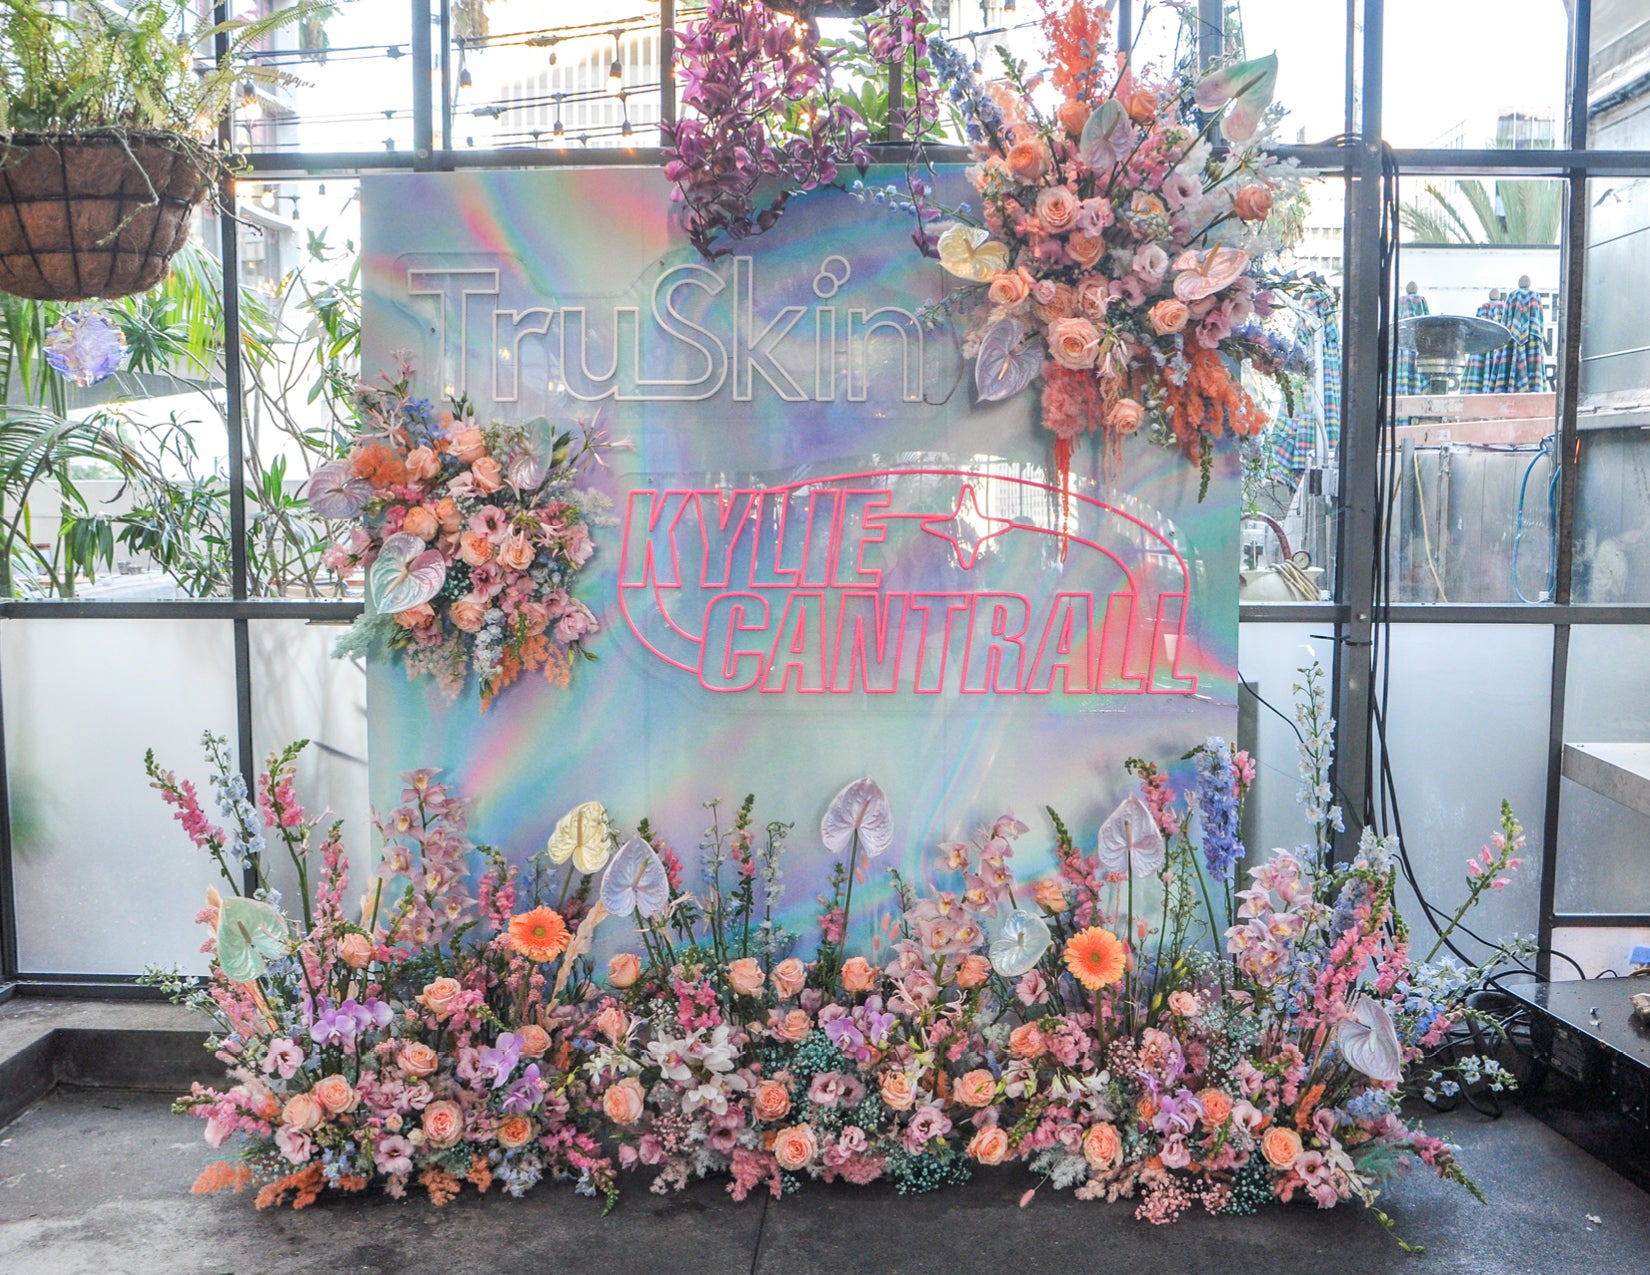 WildFlora TruSkin Kylie Cantrall Event collaboration iridescent iridescence color pastel rainbow palette anthurium ranunculus rose dahlia daisy delphinium lily orchid magical shimmer wall photo booth